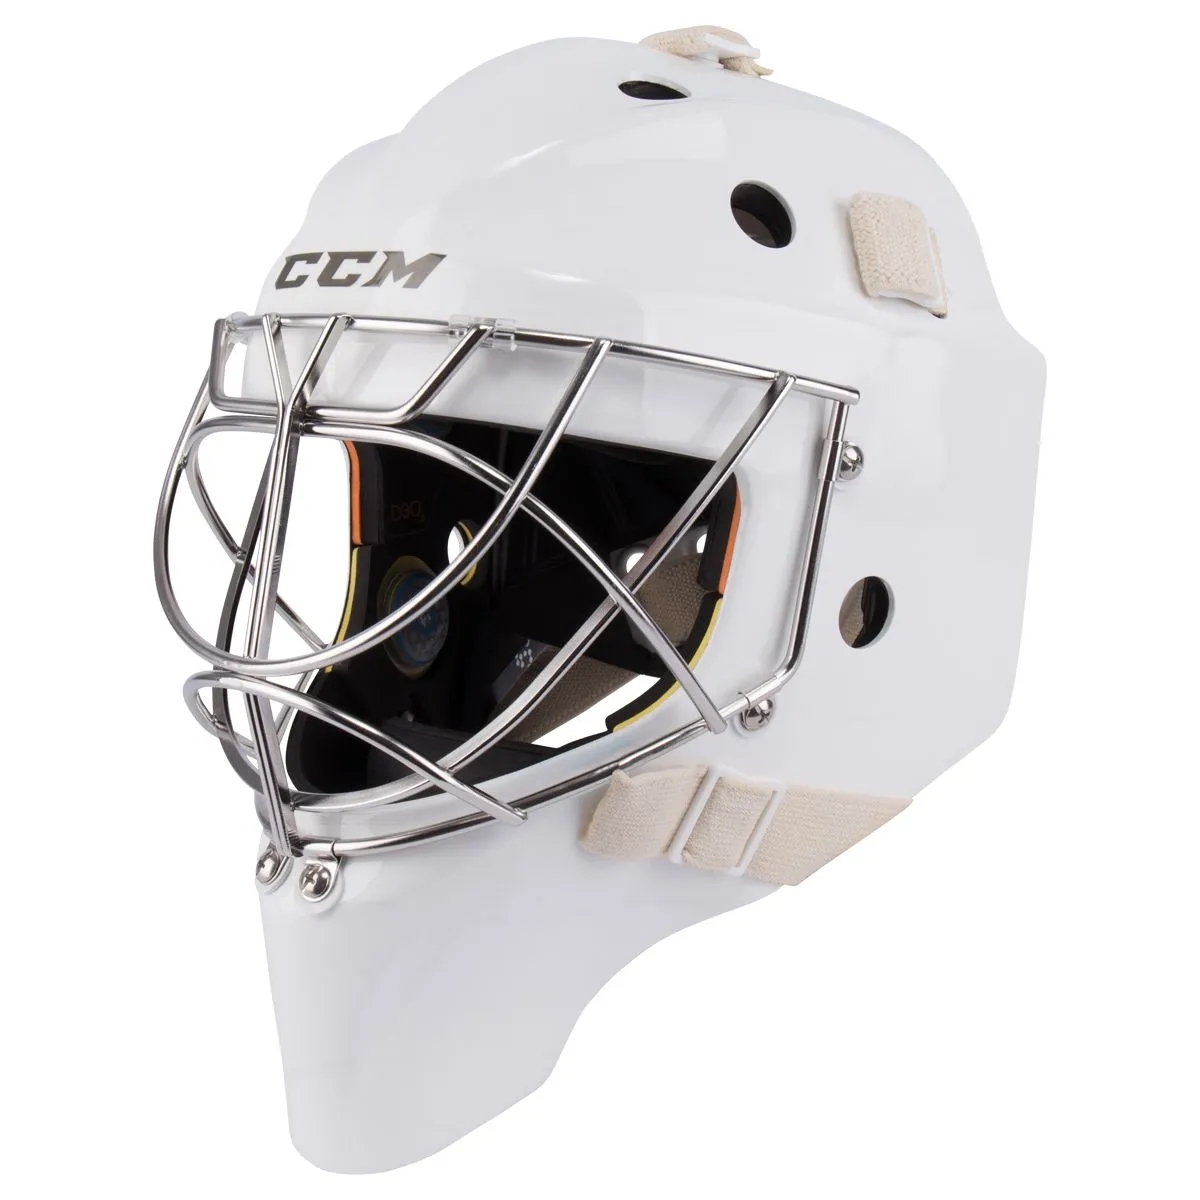 CCM AXIS Sr. Non-Certified Goalie Maskproduct zoom image #1